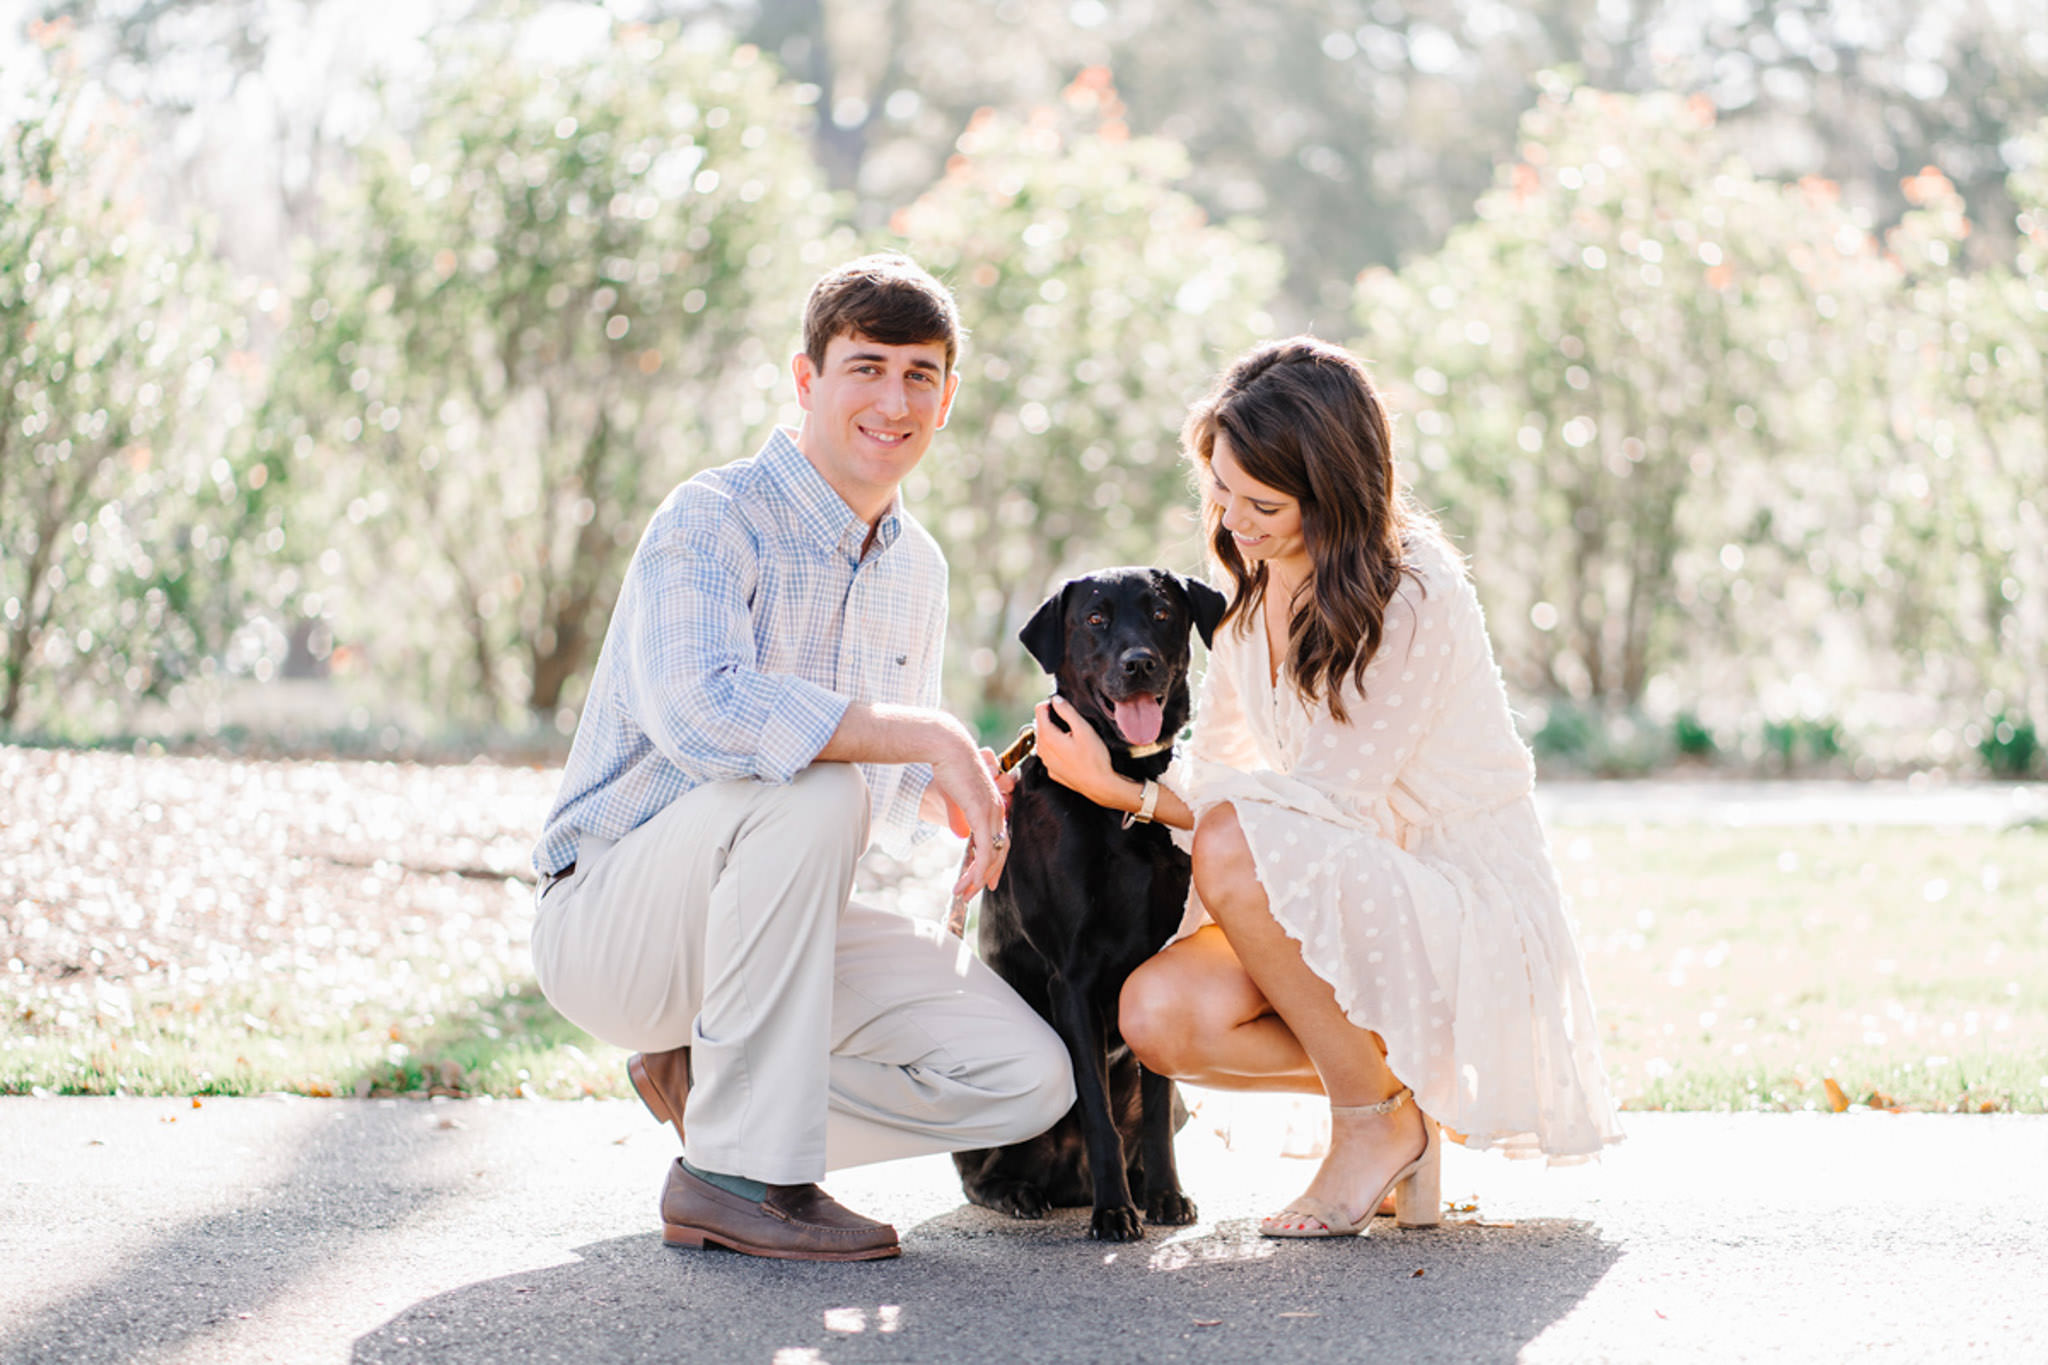 Engagement pictures at Caledonia Golf & Fish Club in Pawleys Island